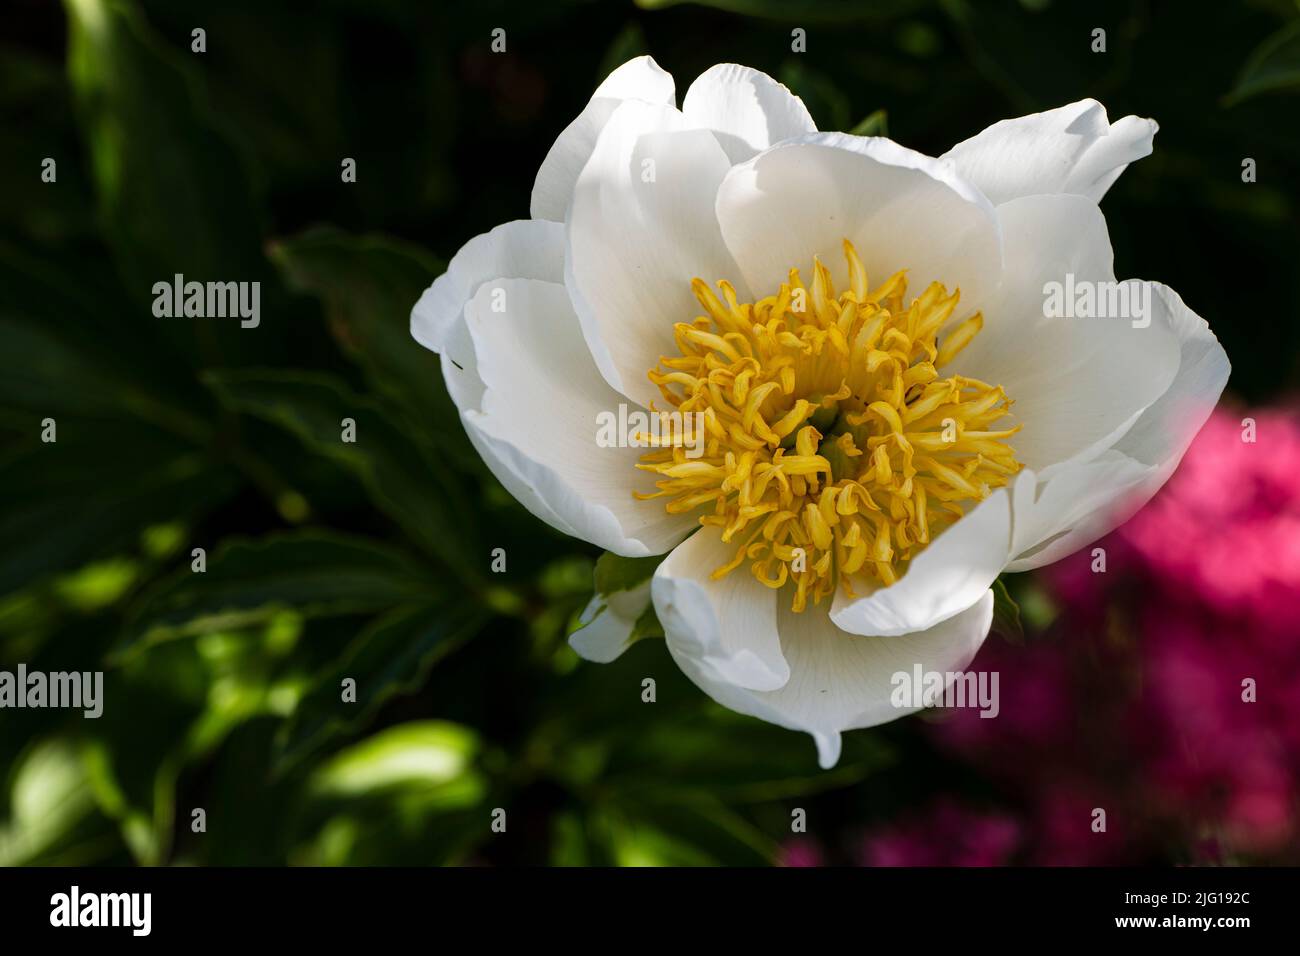 Close-up of a white peonies blossom with yellow dust barrels Stock Photo